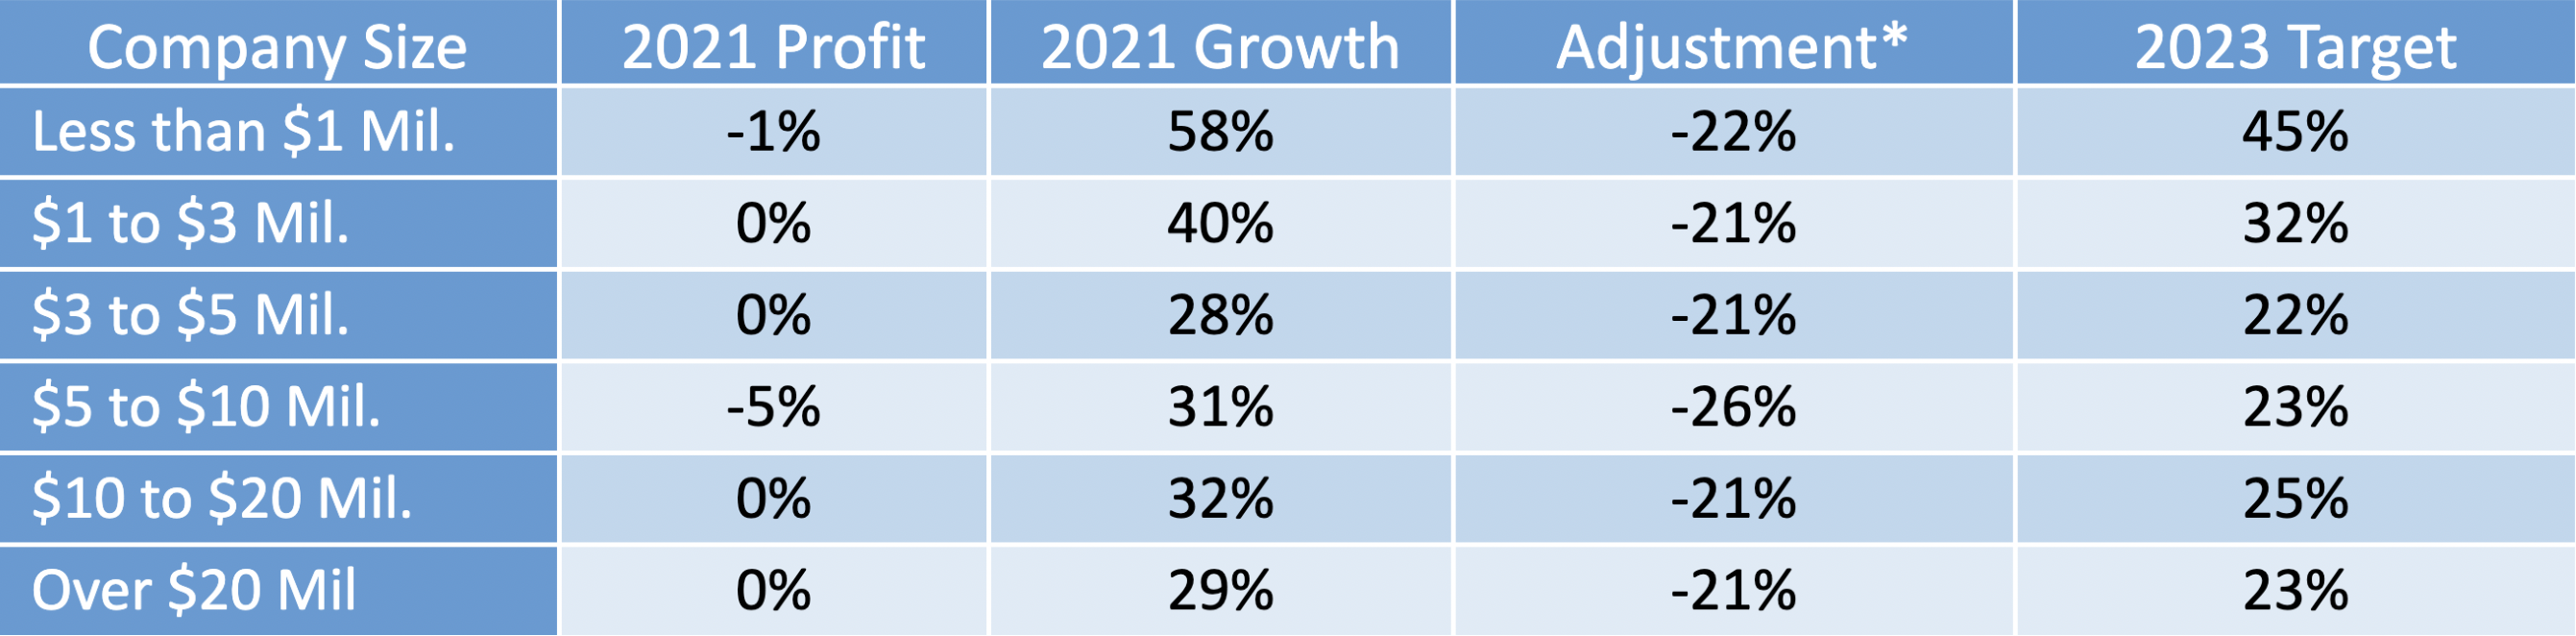 *Growth was adjusted downward based on the deceleration of public company growth in Q3 and Q4 of 2022. Growth was also adjusted downward proportionally for ARR categories operating at a historic loss.